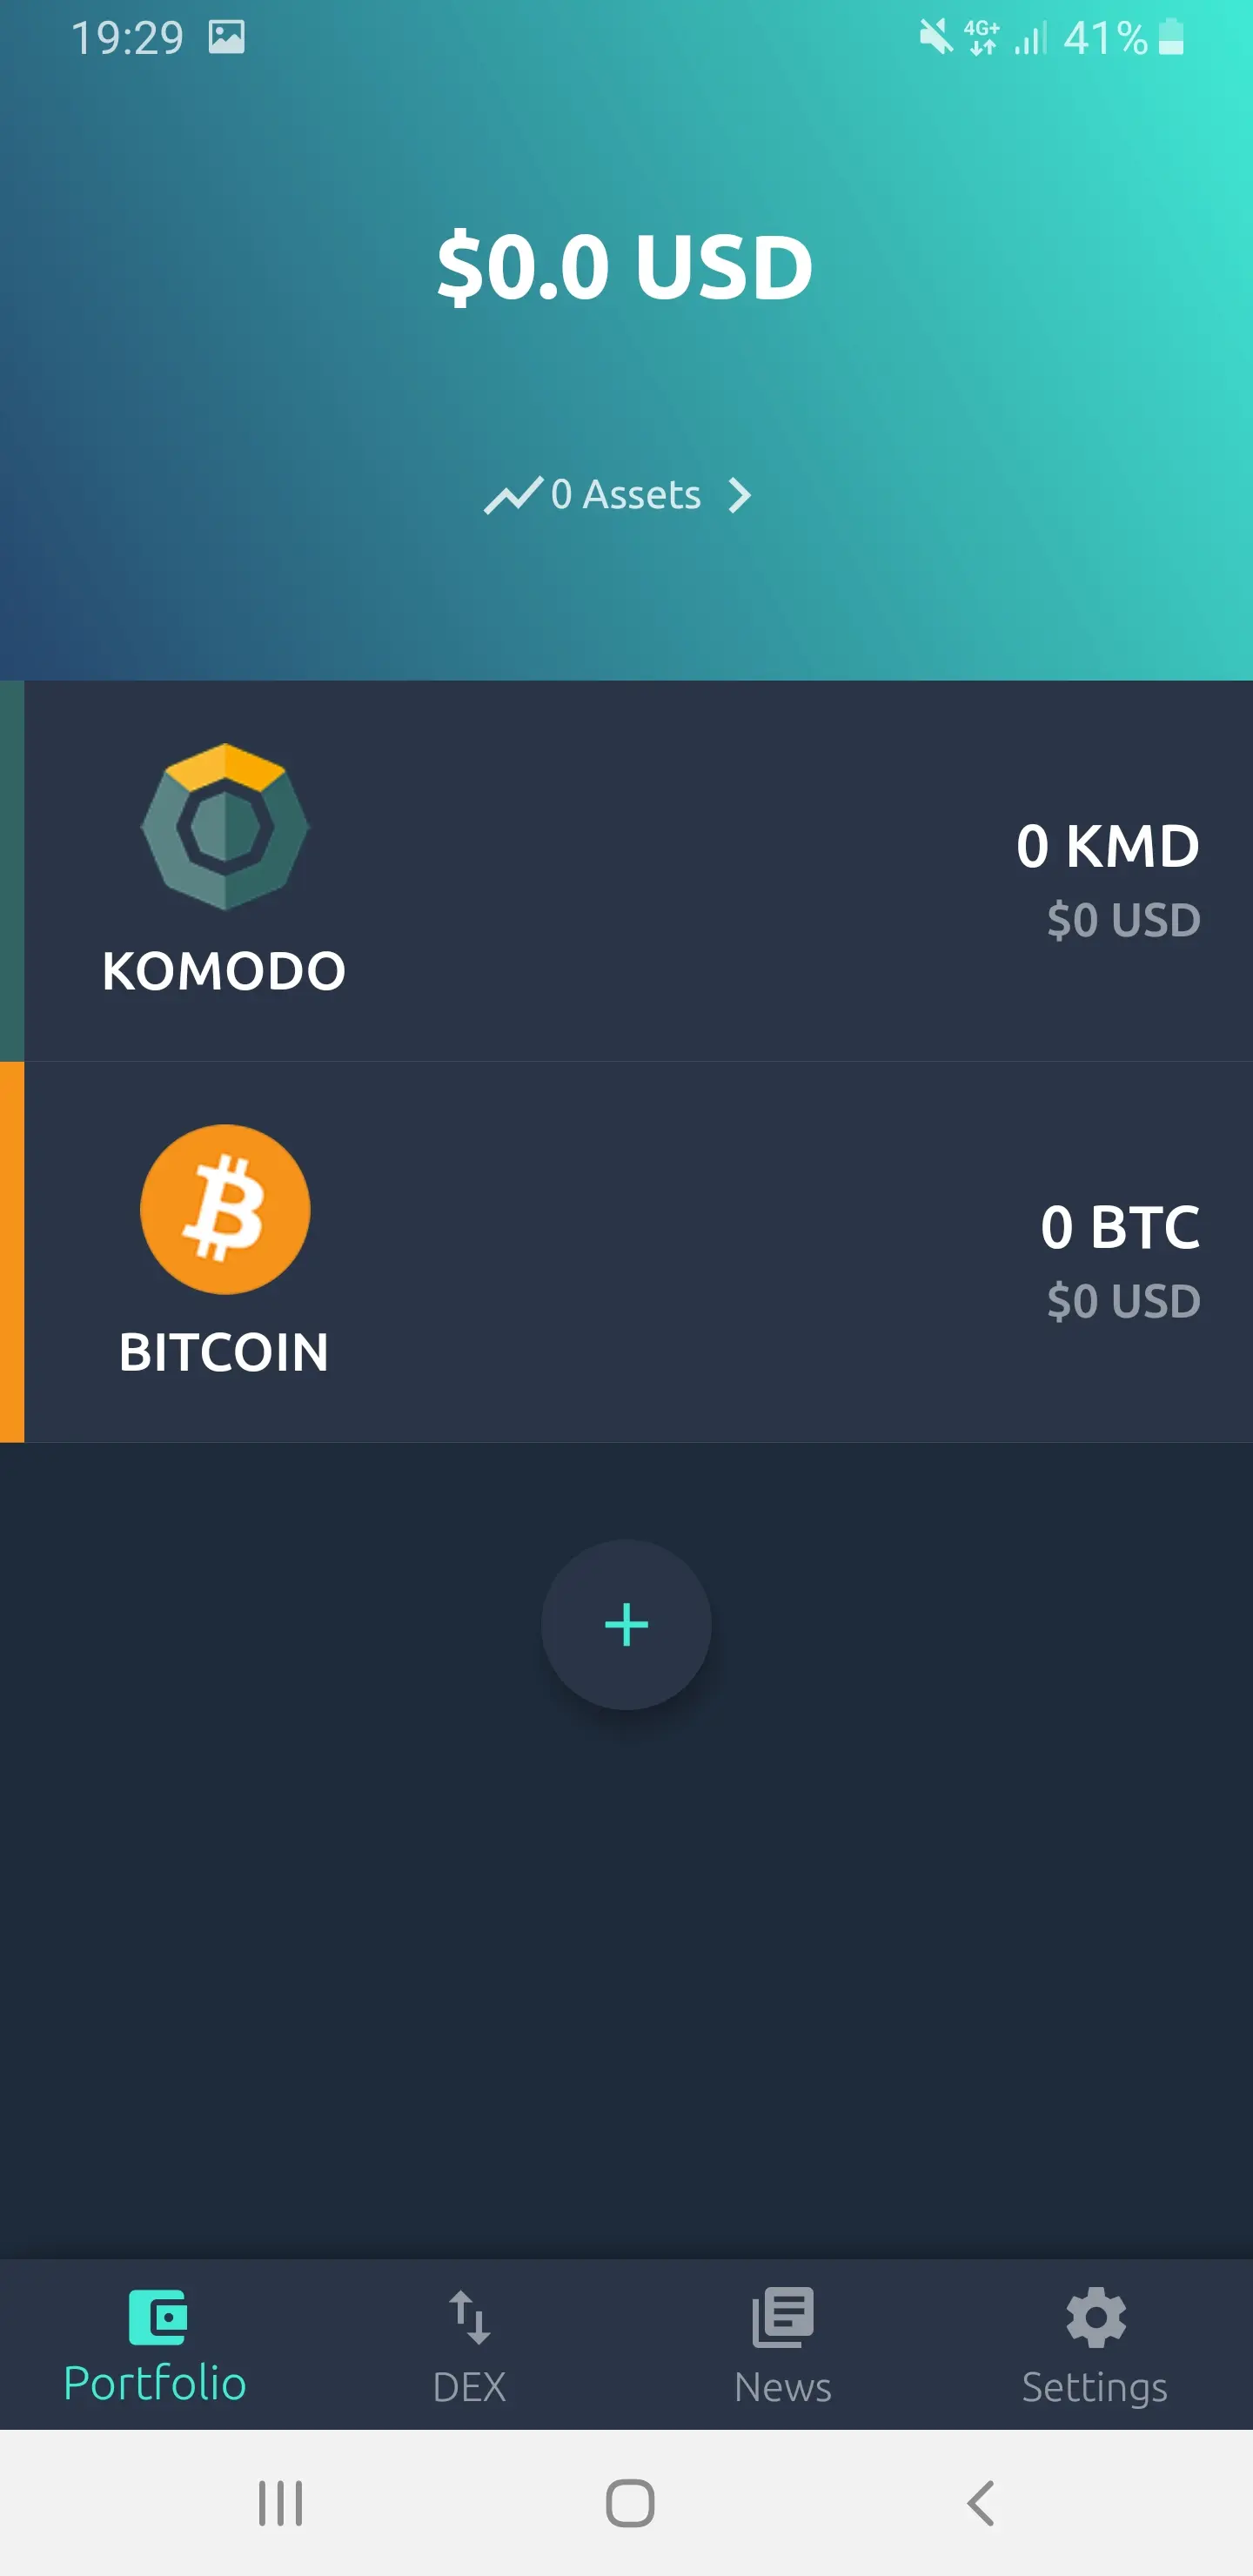 How to Restore Wallet Using Komodo Mobile Wallet